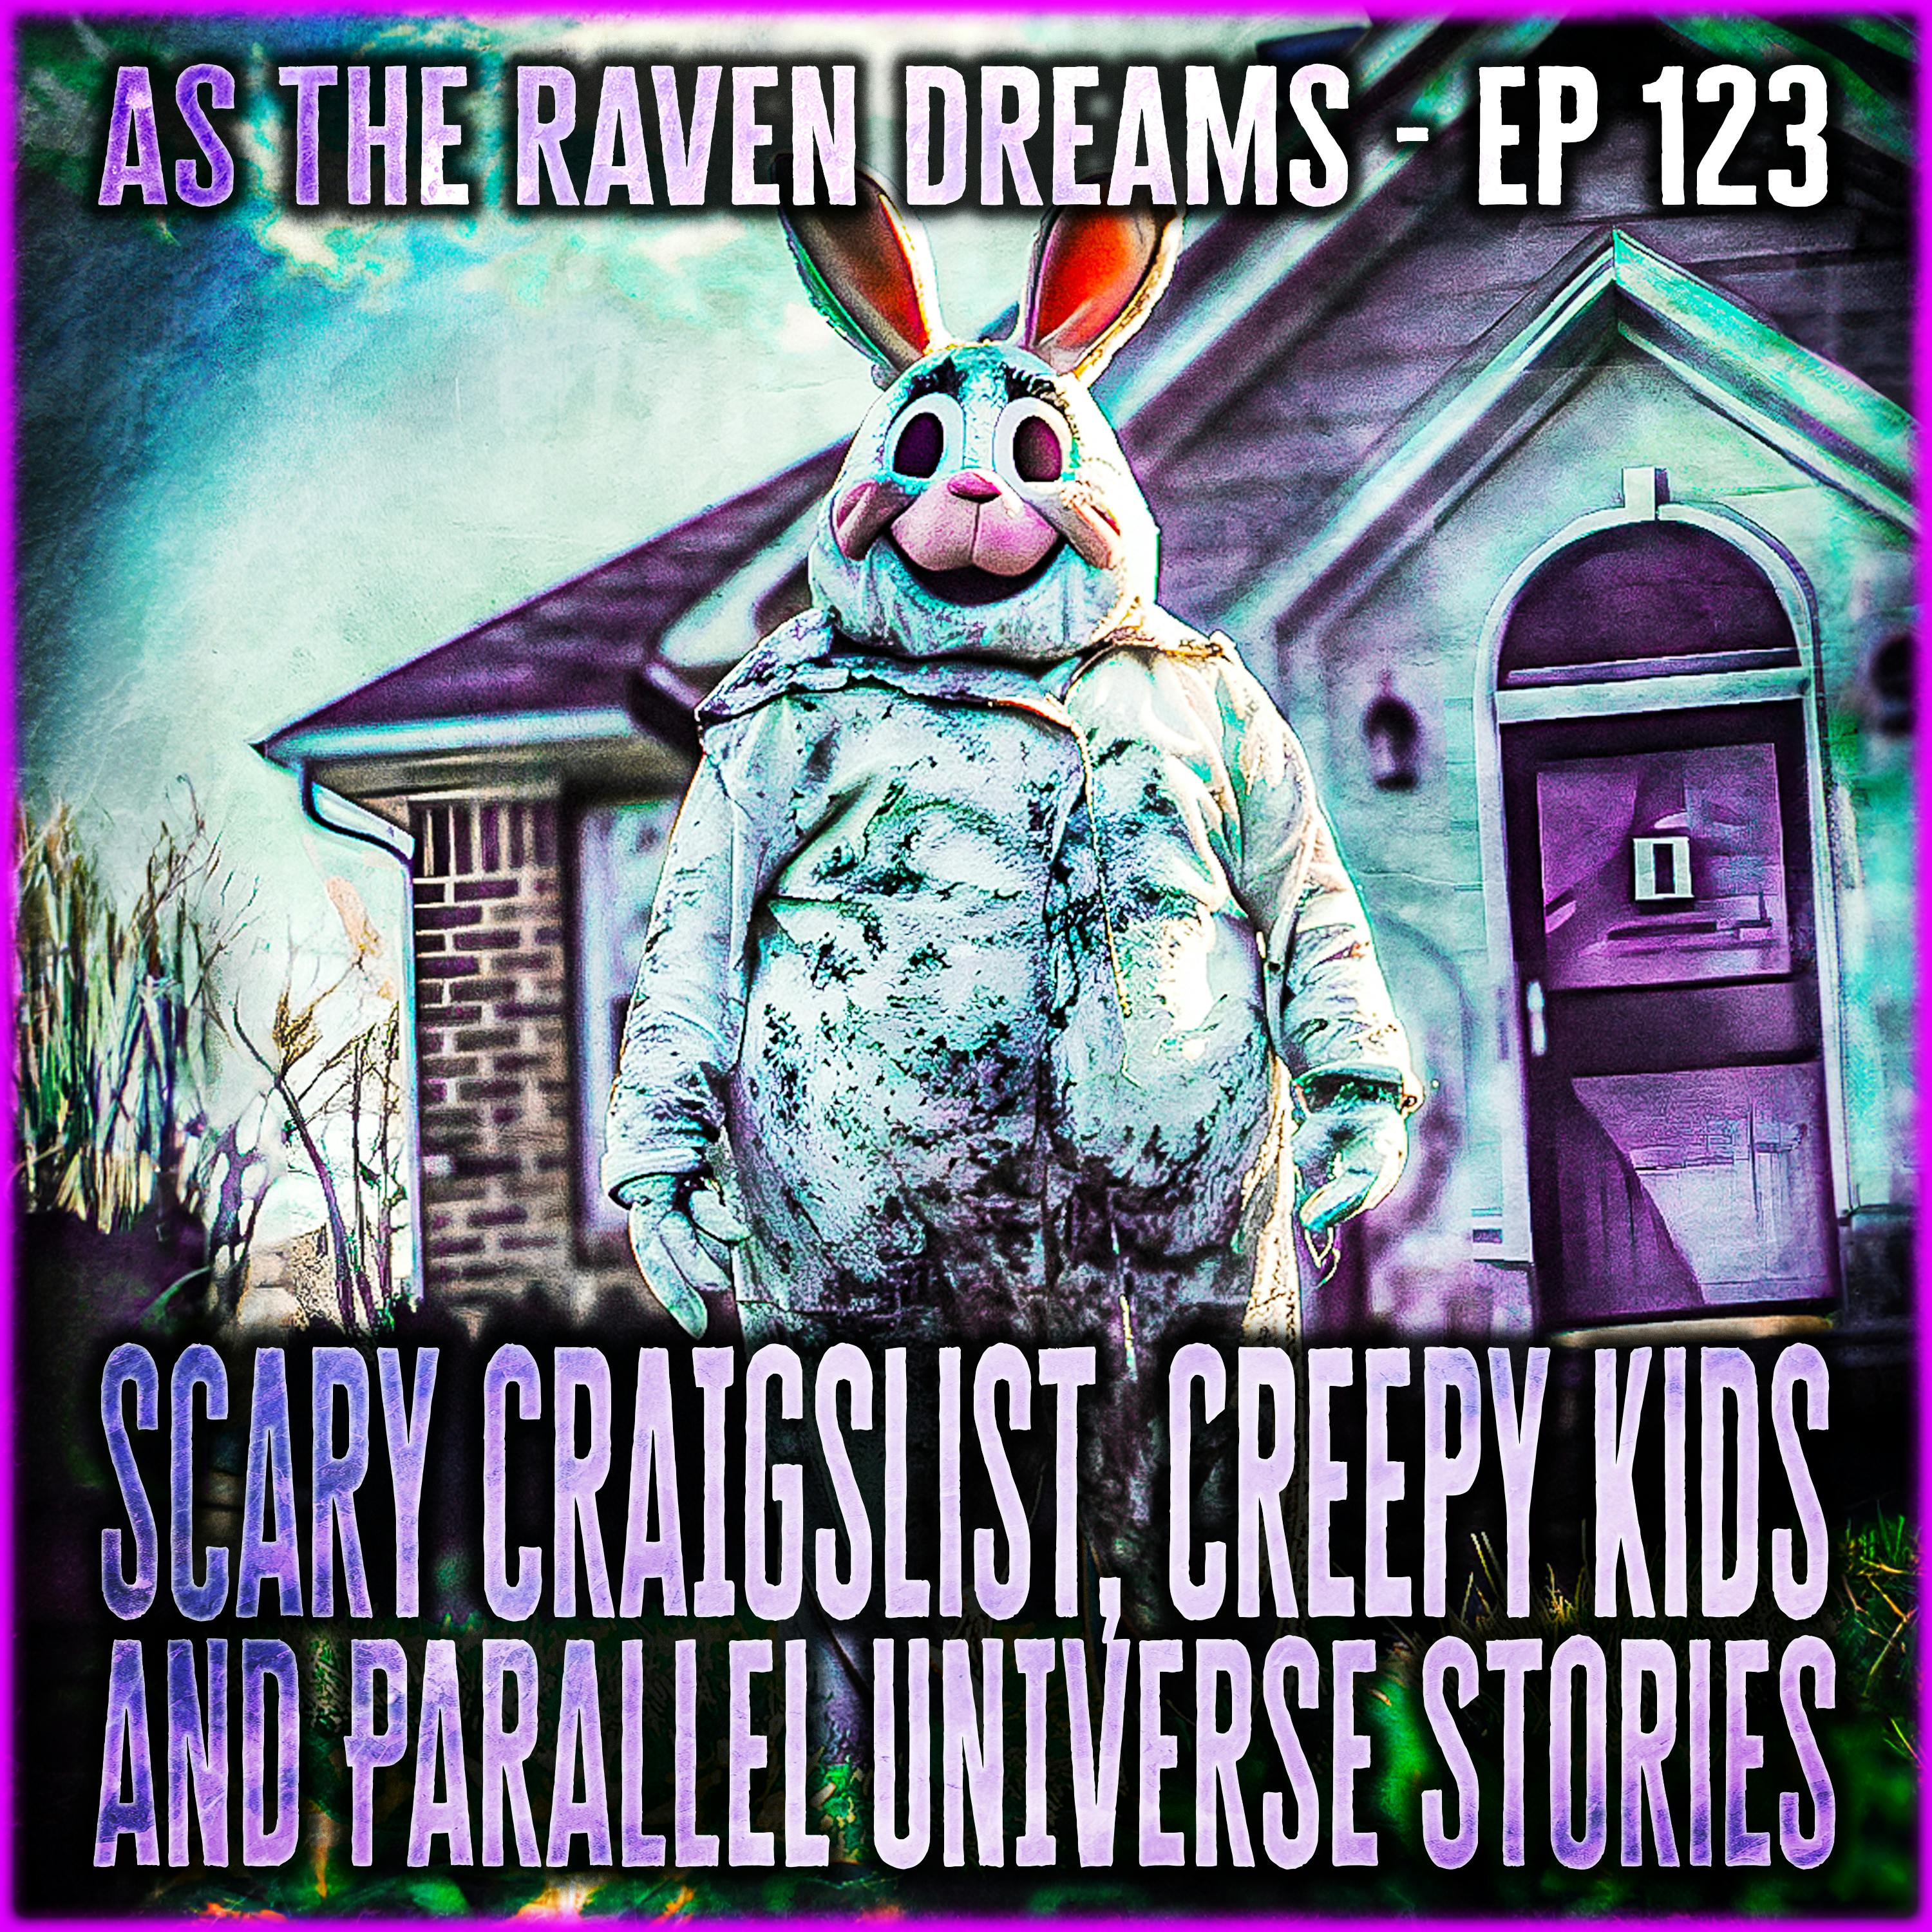 ATRD Ep. 123 - Scary Craigslist, Creepy Kids, and Parallel Universe Stories - 13 True Scary Stories